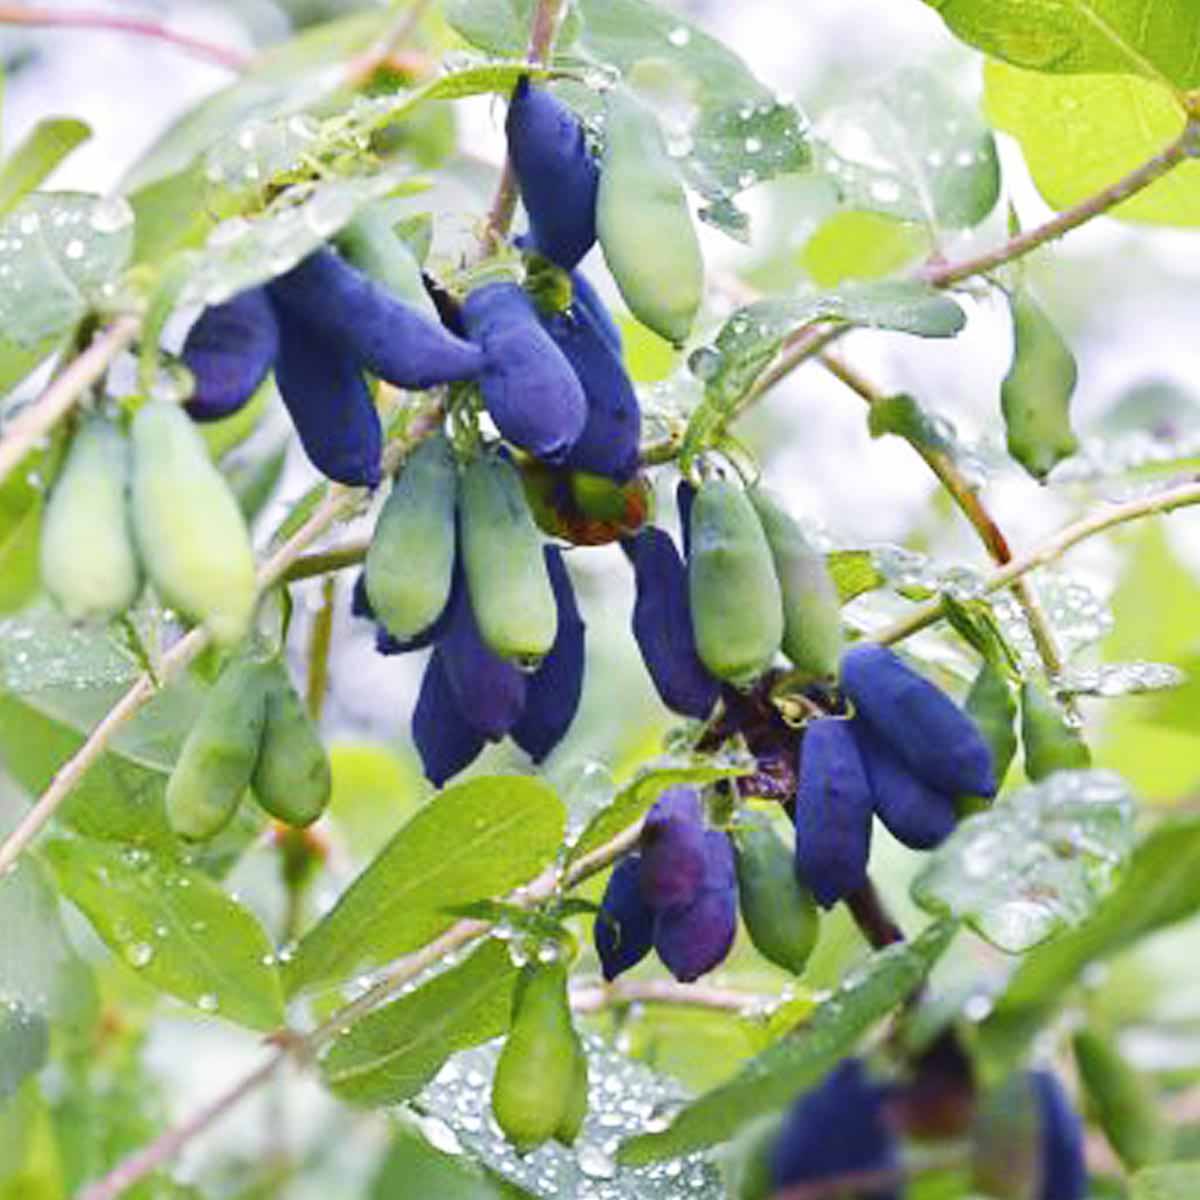 Long blue honeyberries hang from the bush ready to be picked.